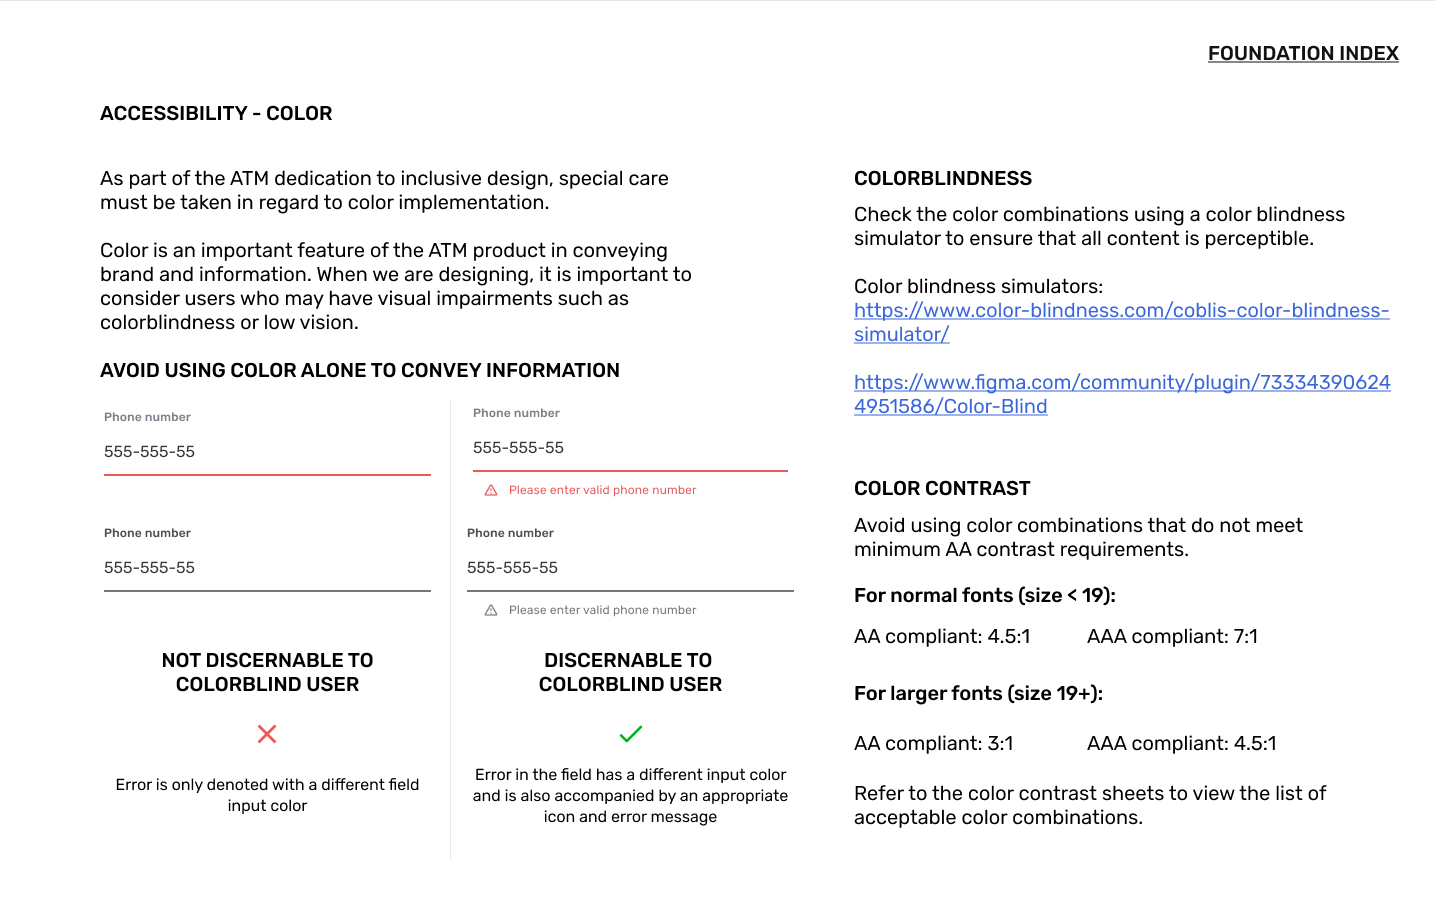 Sample documentation of accessibility for color contrast and color blindness